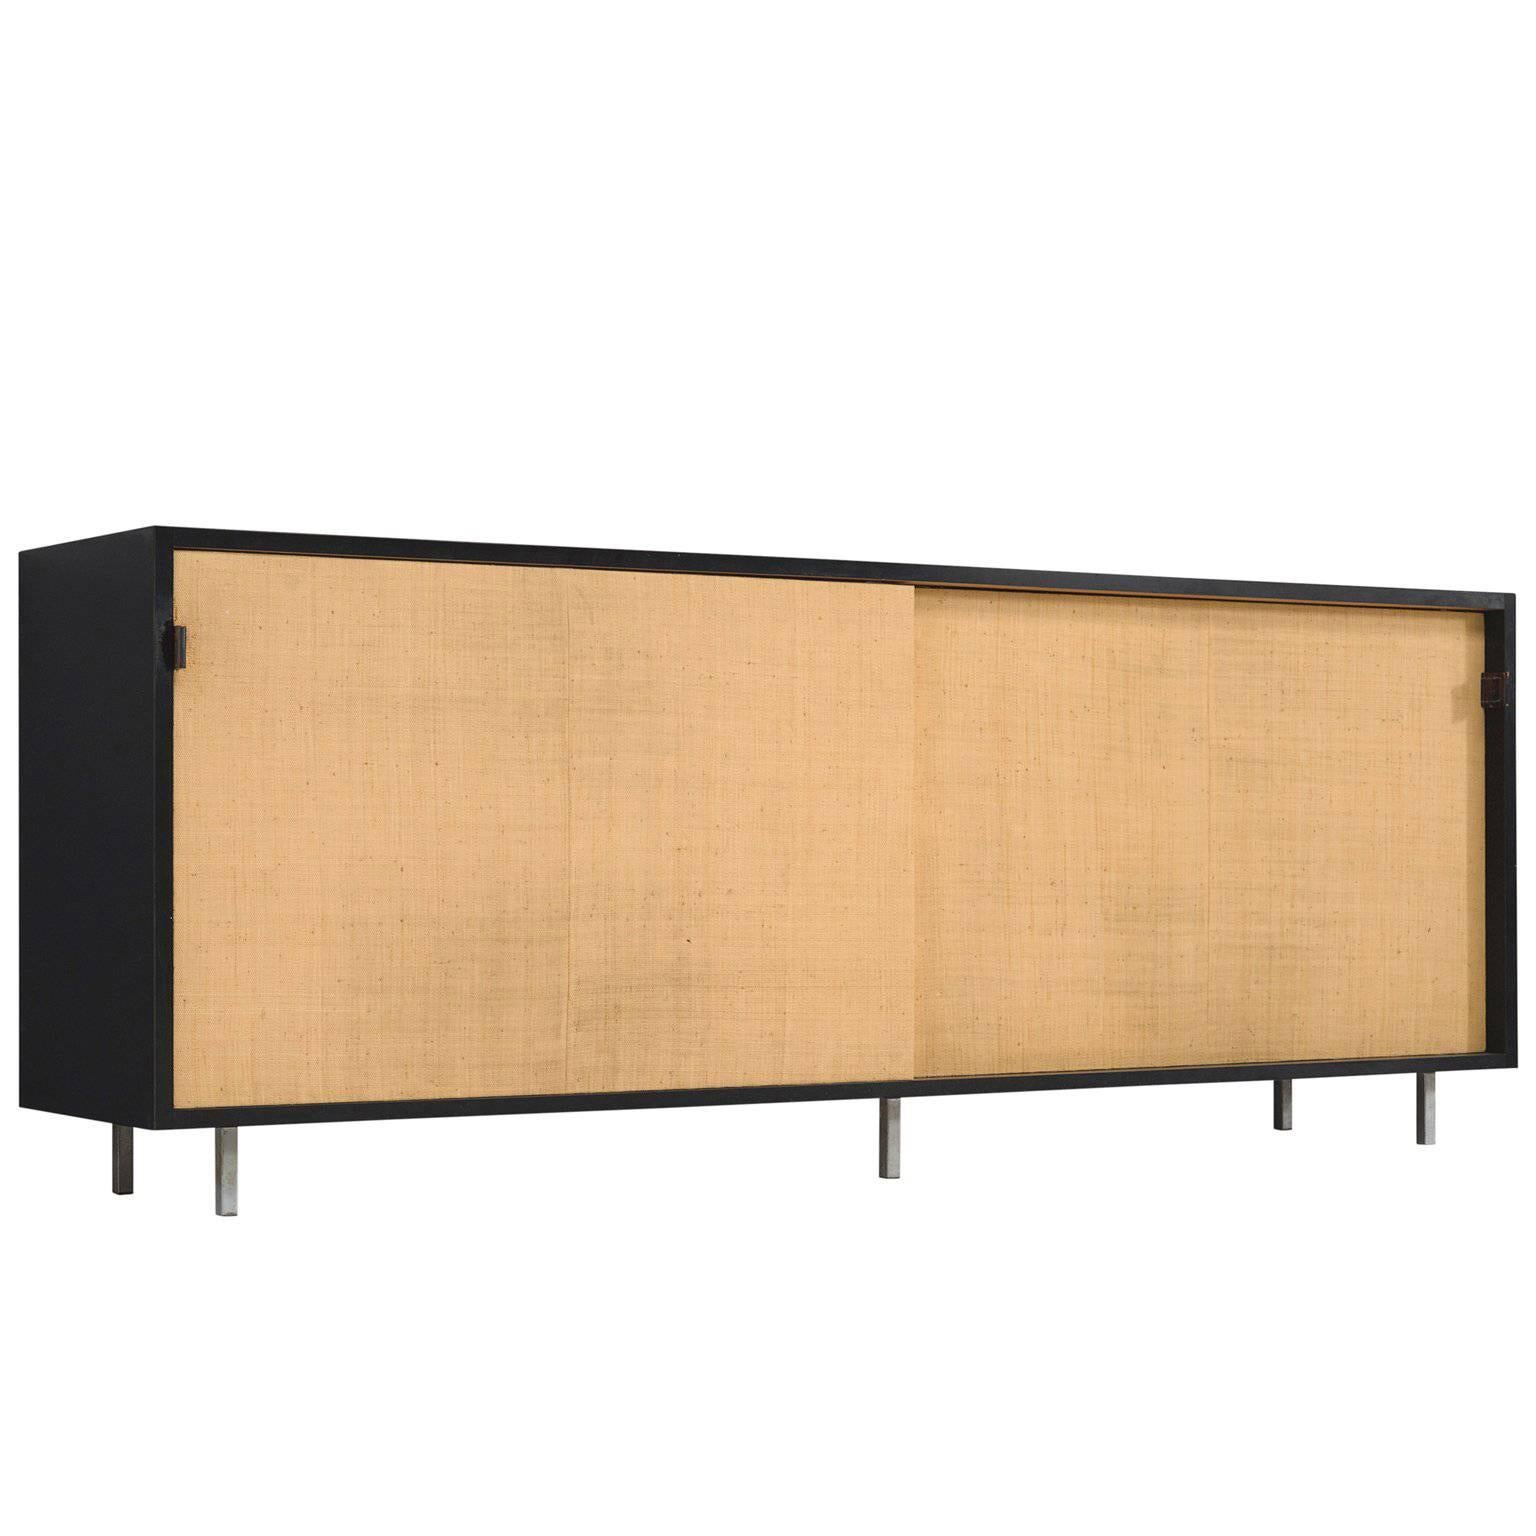 Early Florence Knoll Seagrass Credenza for Knoll